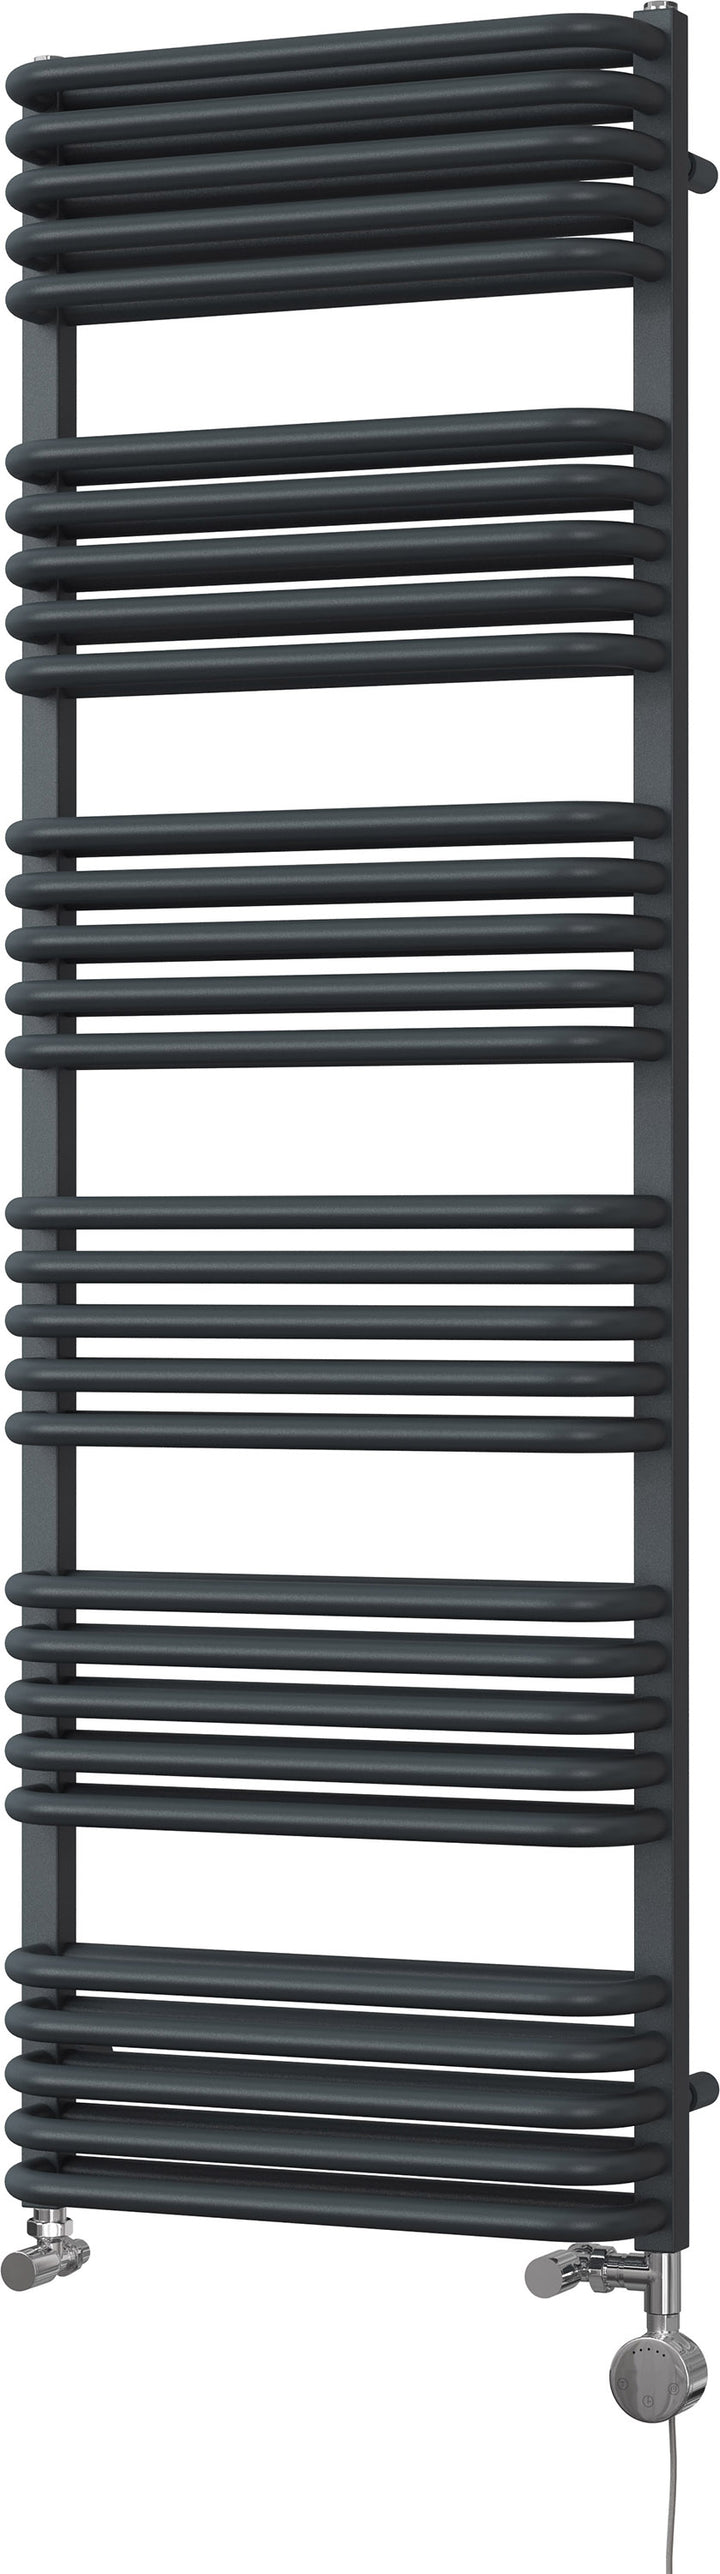 Crossmoor - Anthracite Dual Fuel Towel Rail H1533mm x W500mm Thermostatic